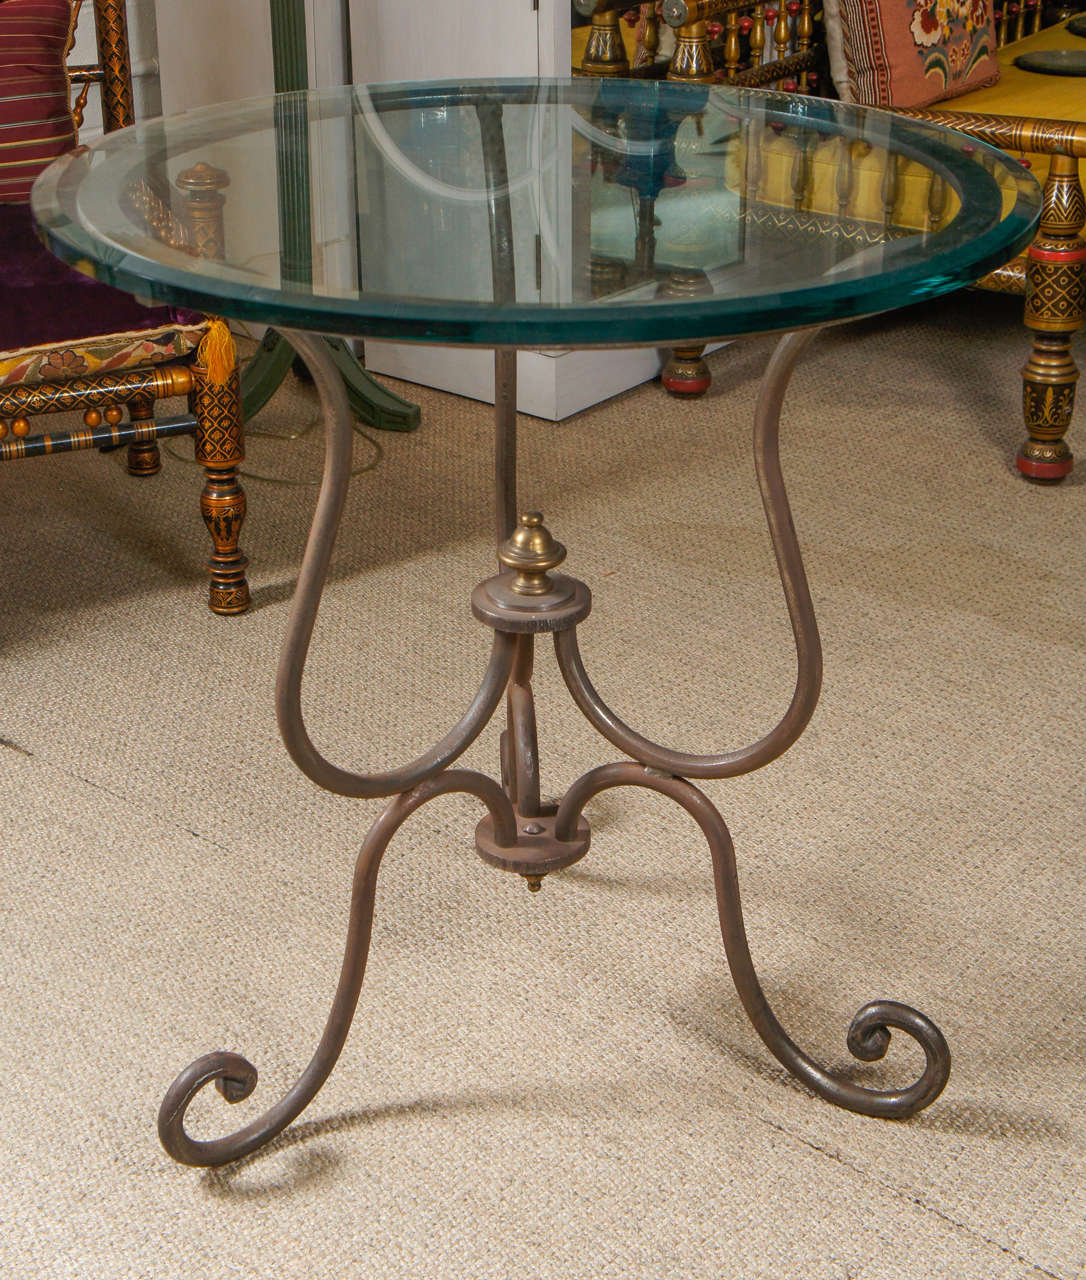 Here is an iron table with a scroll motif and a thick glass top.